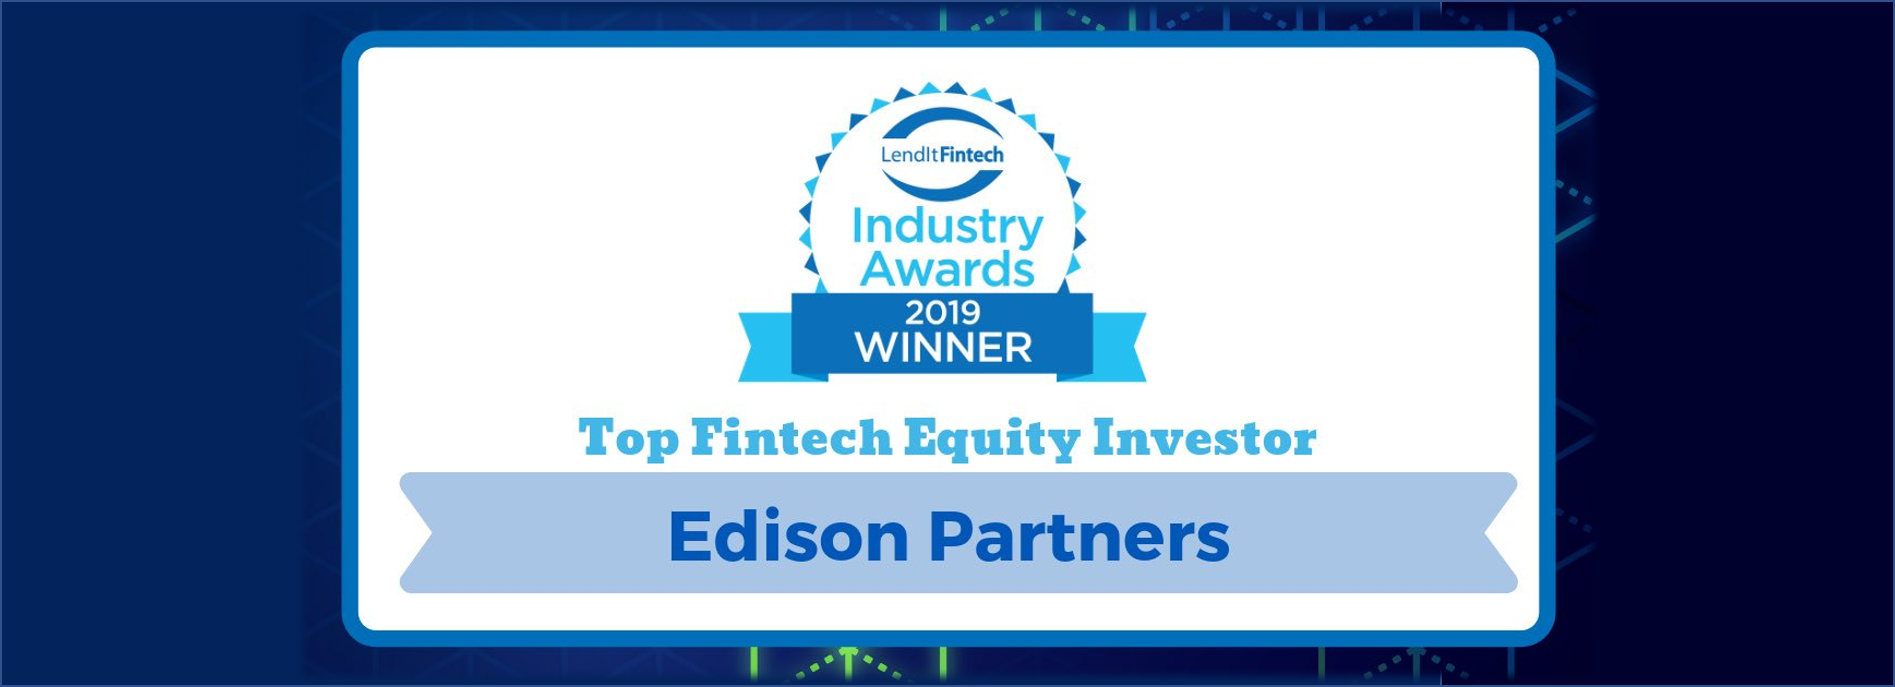 Edison Partners Named Top Fintech Equity Investor